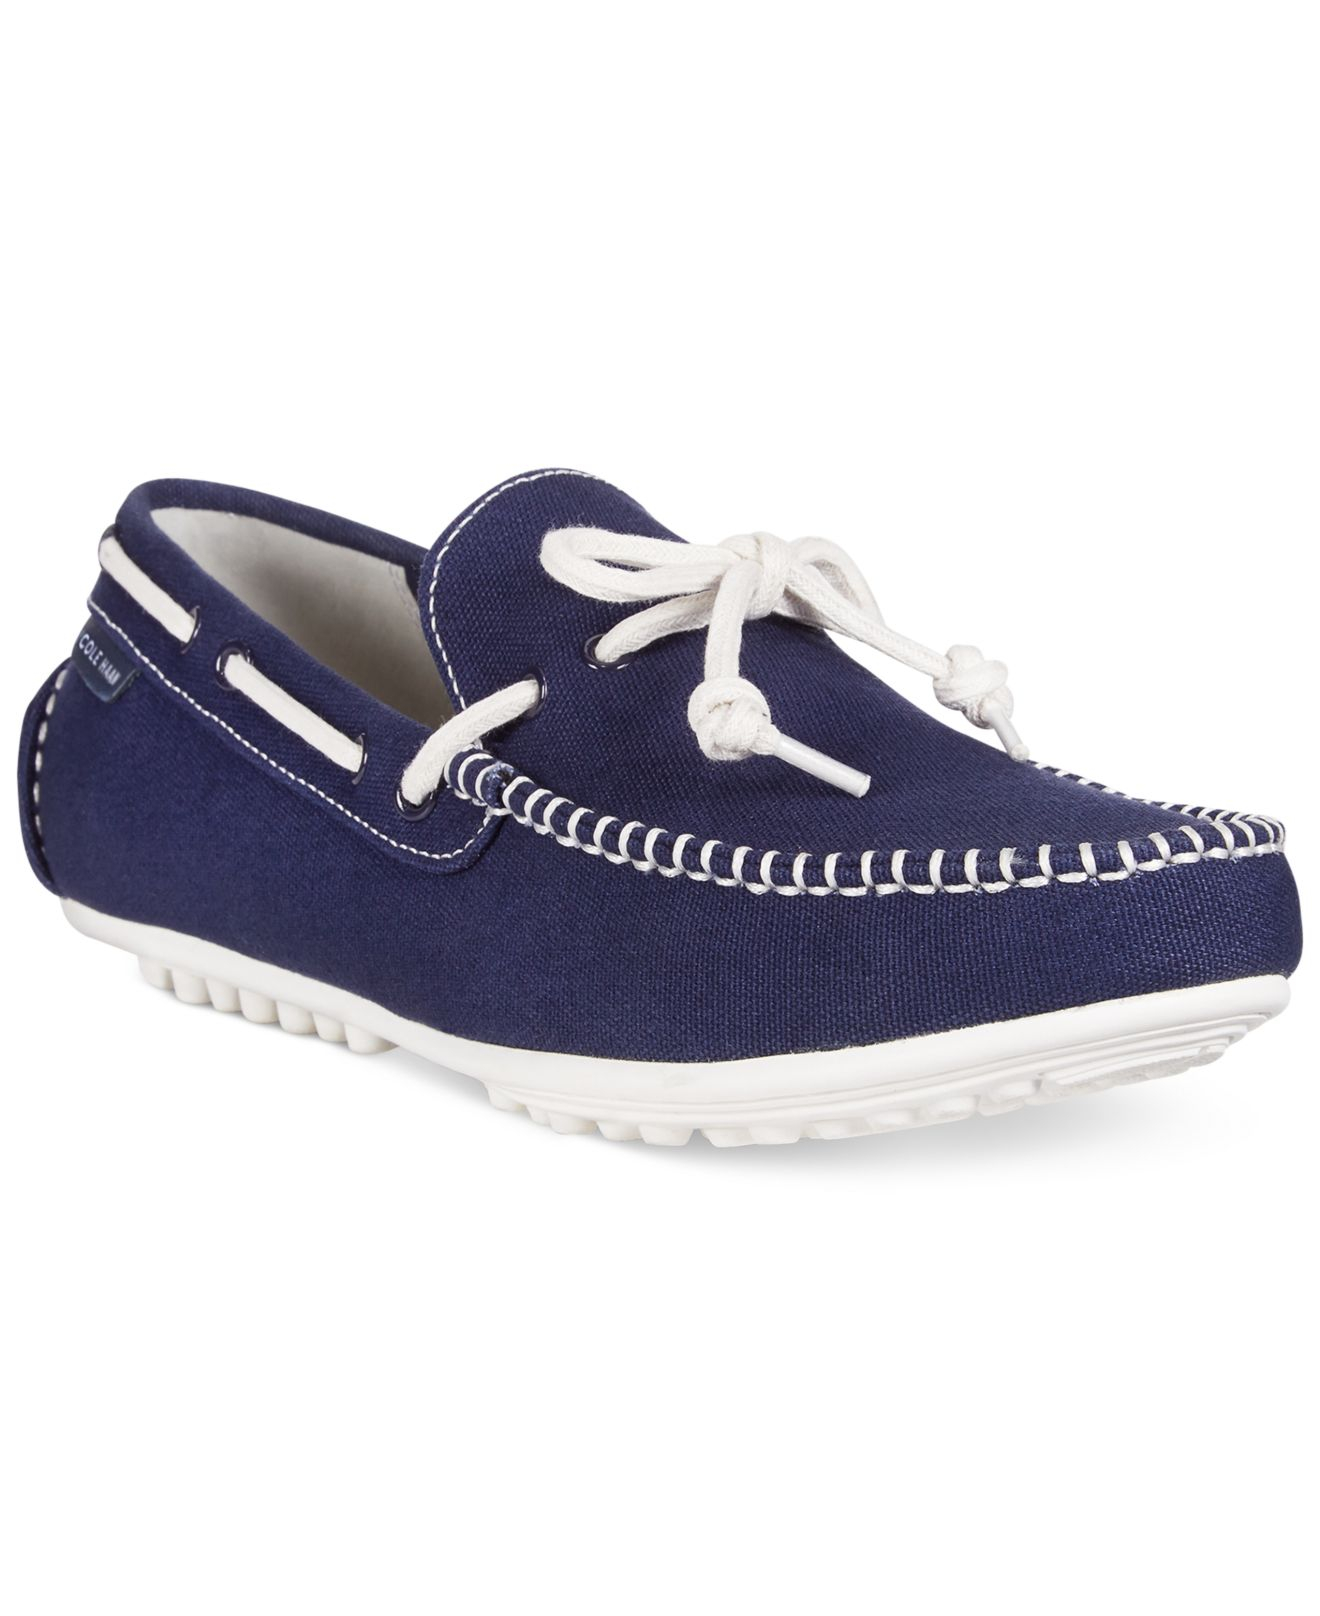 Lyst Cole Haan Grant Escape Oxford Boat Shoes in Blue